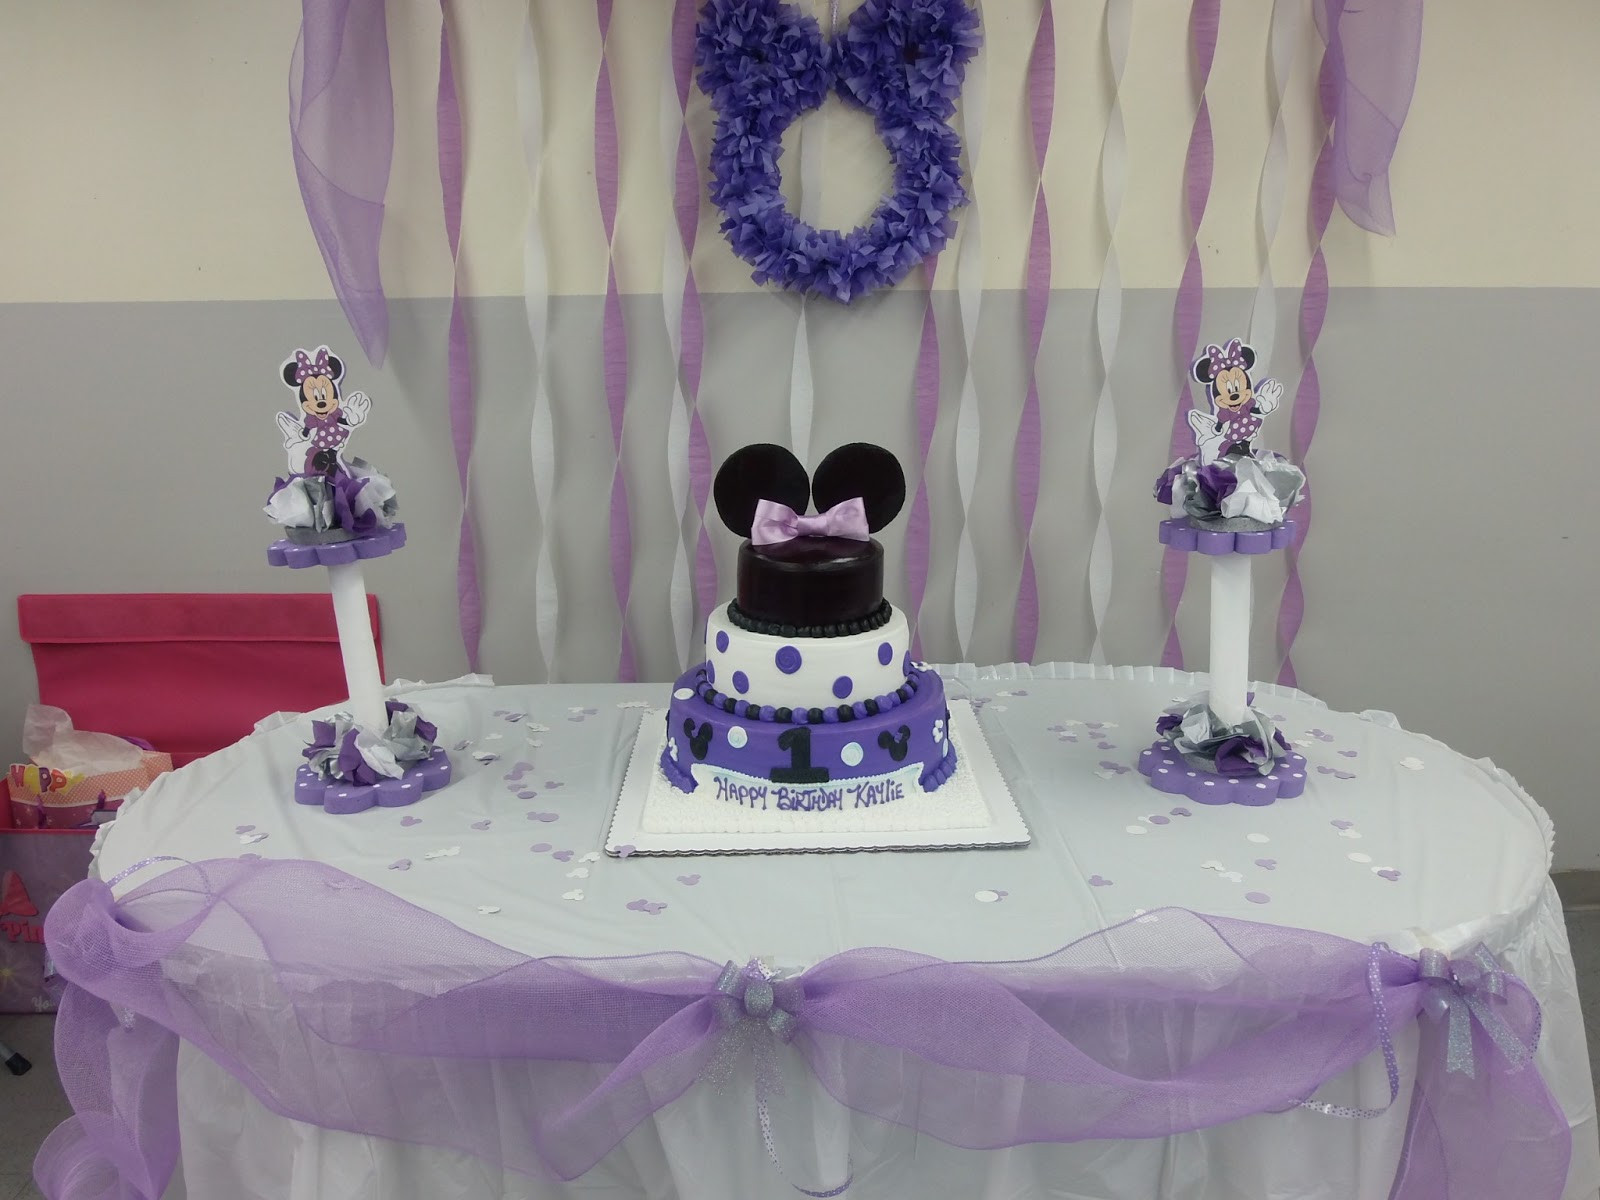 Diy Minnie Mouse Birthday Decorations
 Living life backwards DIY Minnie Mouse decorations